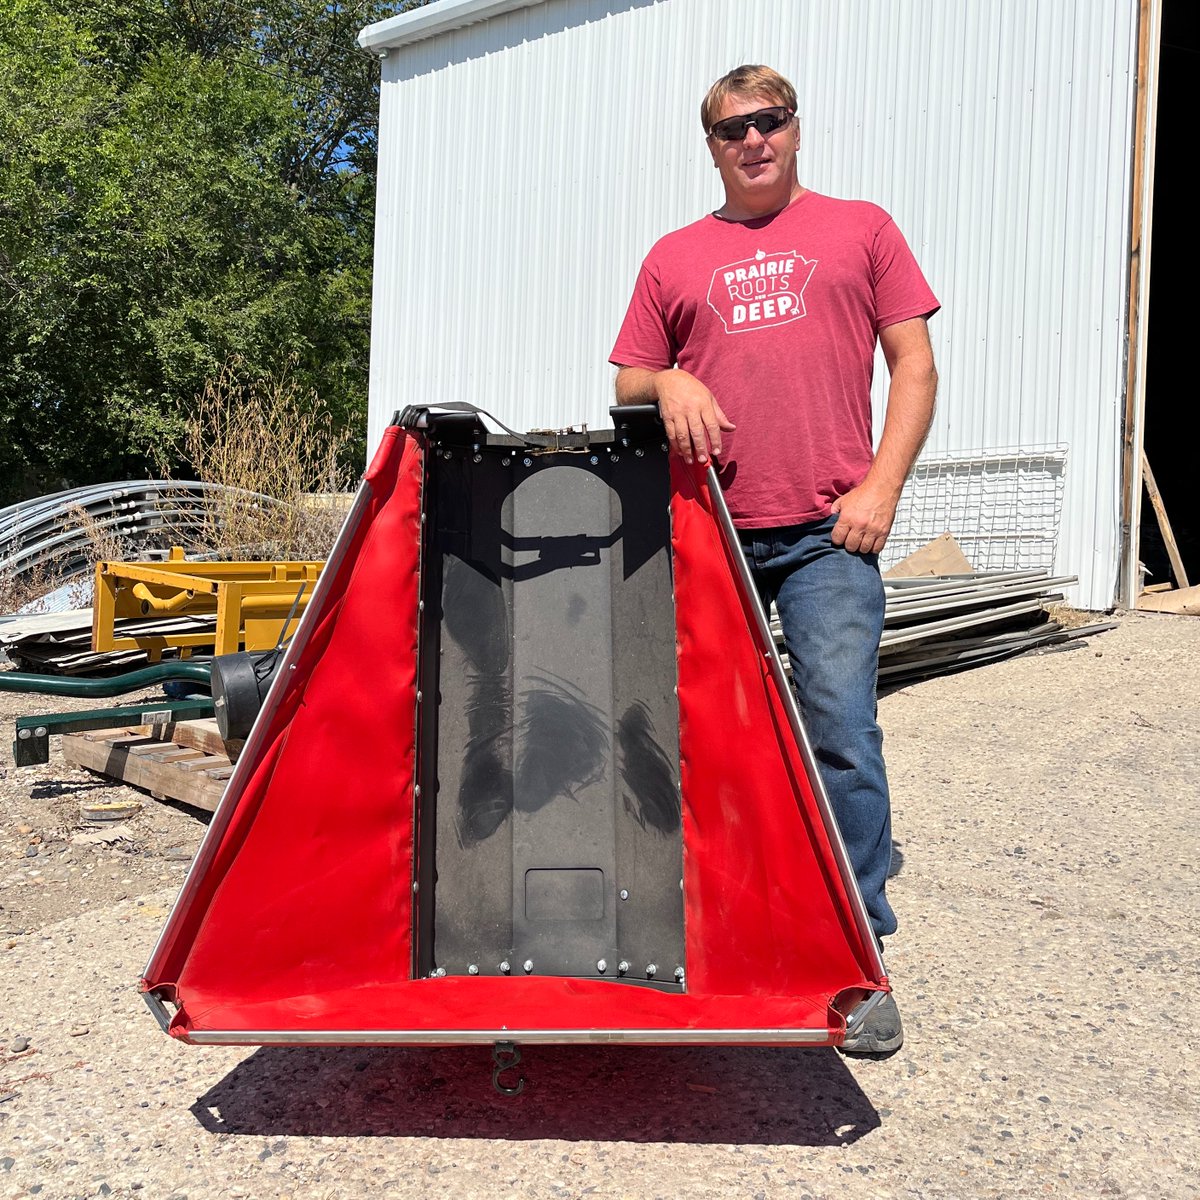 Congratulations to Darren Beernaert who was our big prize winner at our Customer Appreciation event last week!  He stopped in late yesterday to pick up his pop-up hopper.
Happy Harvest Darren!
#BoundaryCoop  #CoopAgro  #WeAreCoop